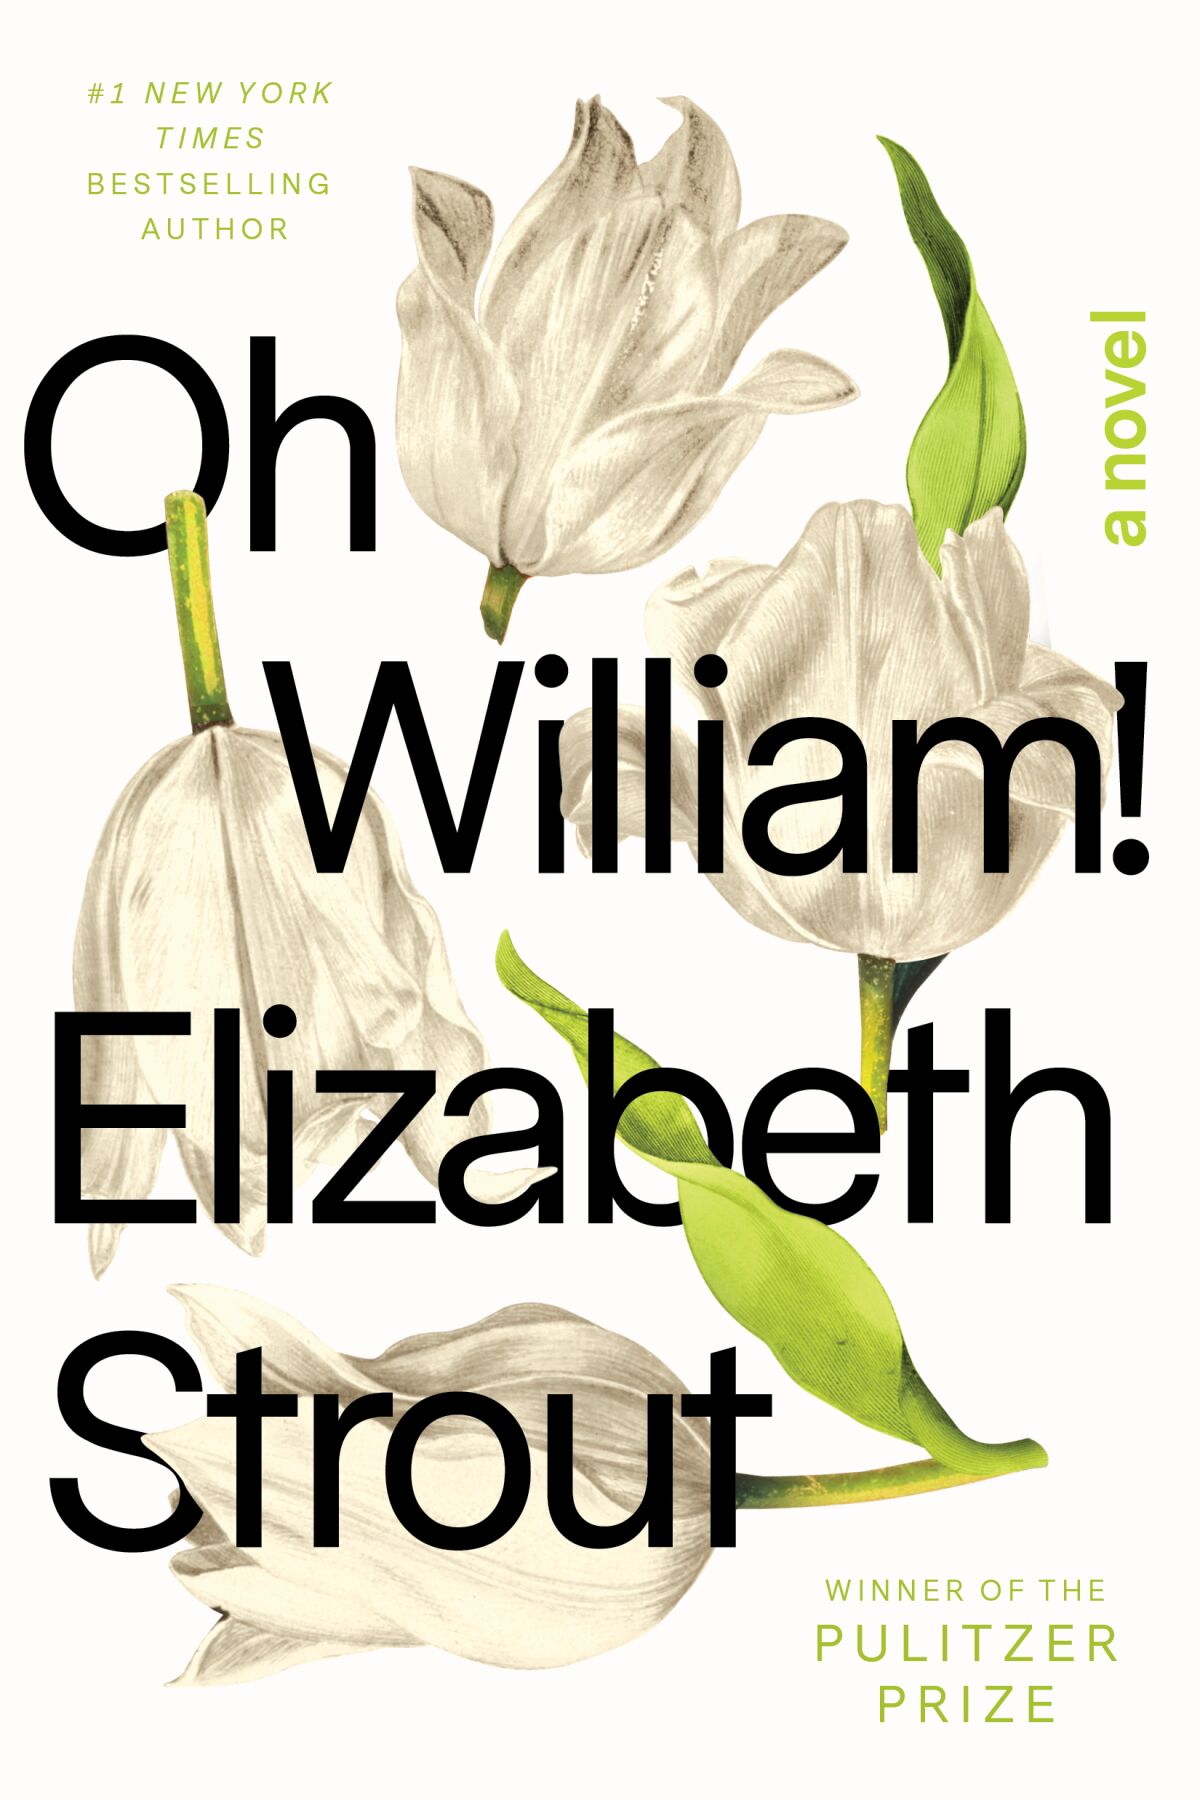 Book cover of "Oh William," by Elizabeth Strout, with white flowers 